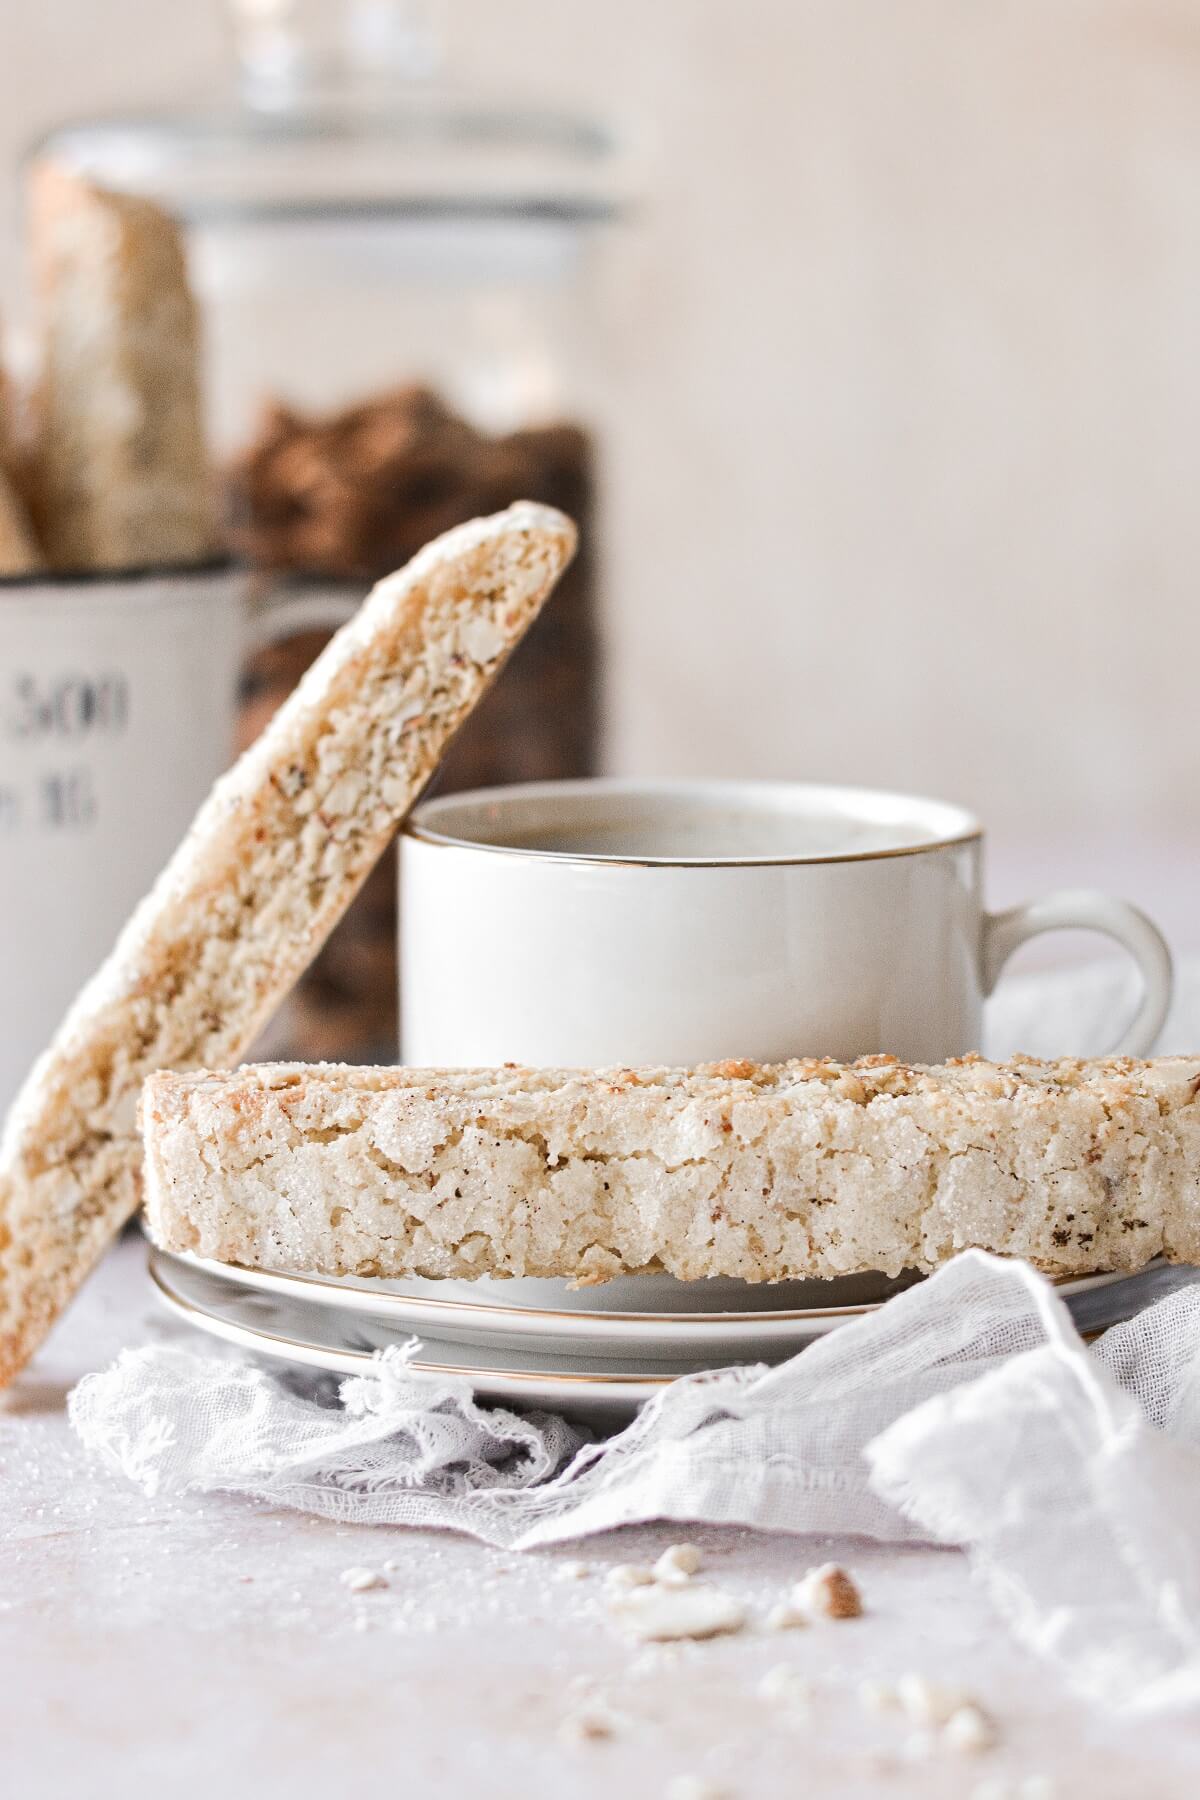 Almond biscotti on a saucer with a cup of coffee.